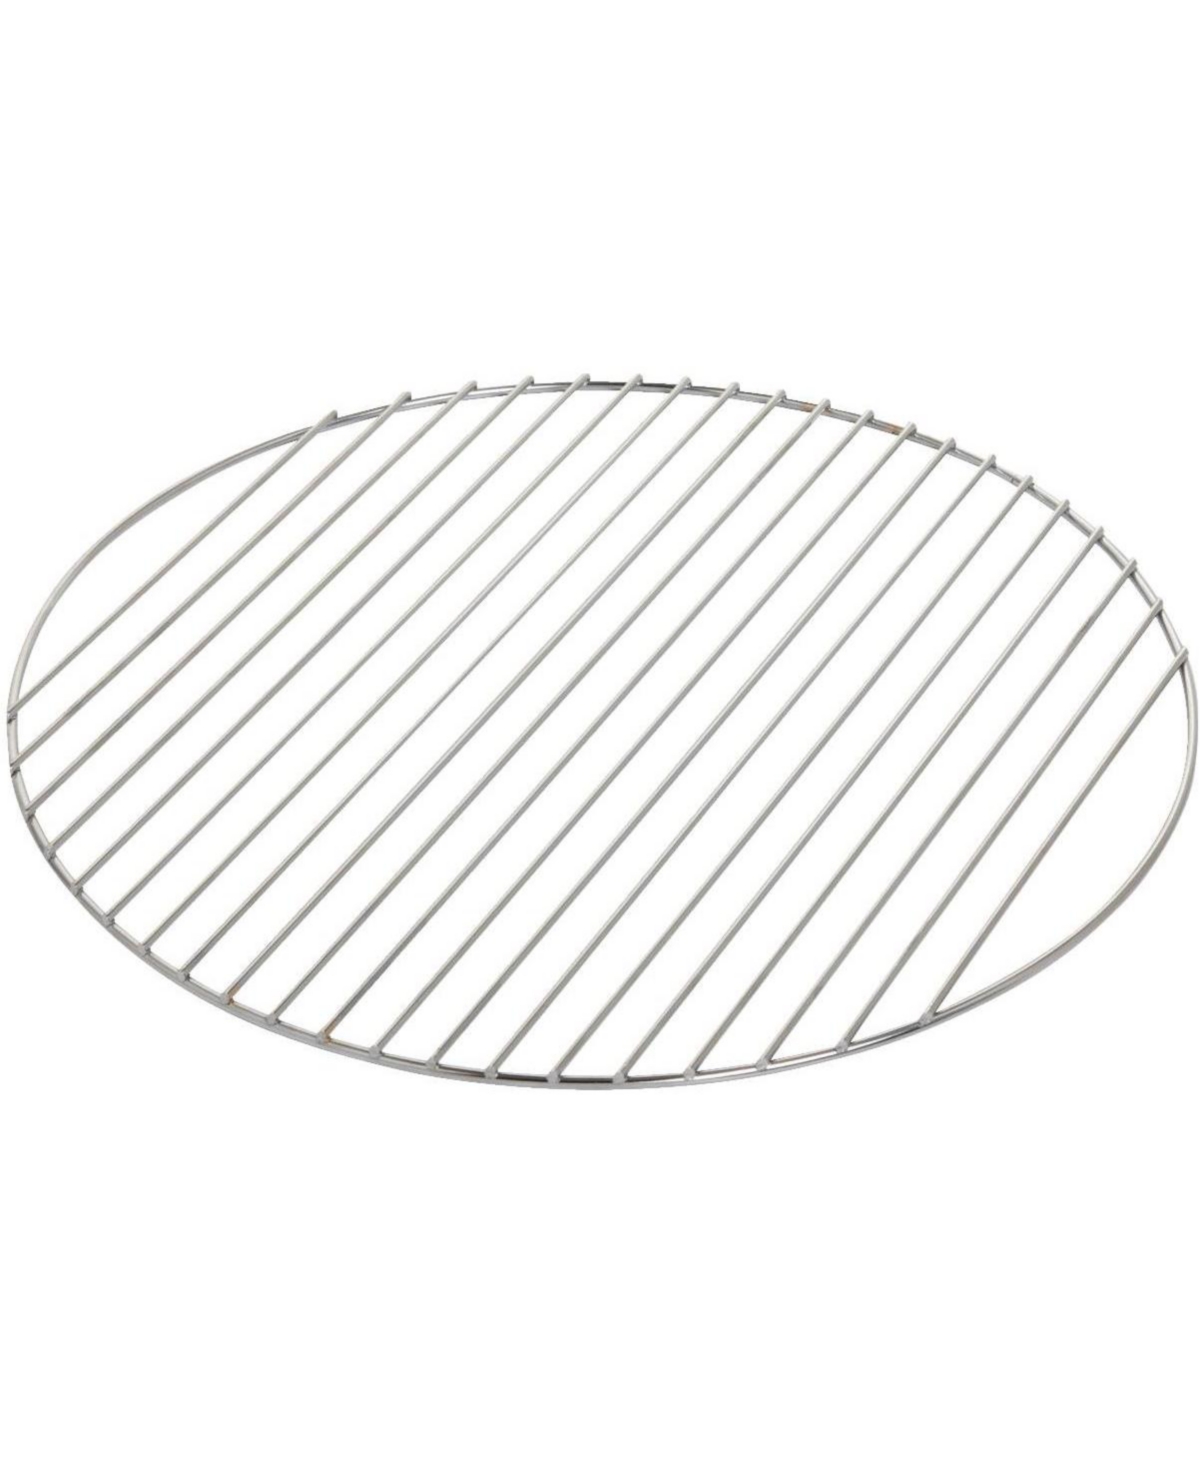 #17TG Replacement Top Grill - Silver